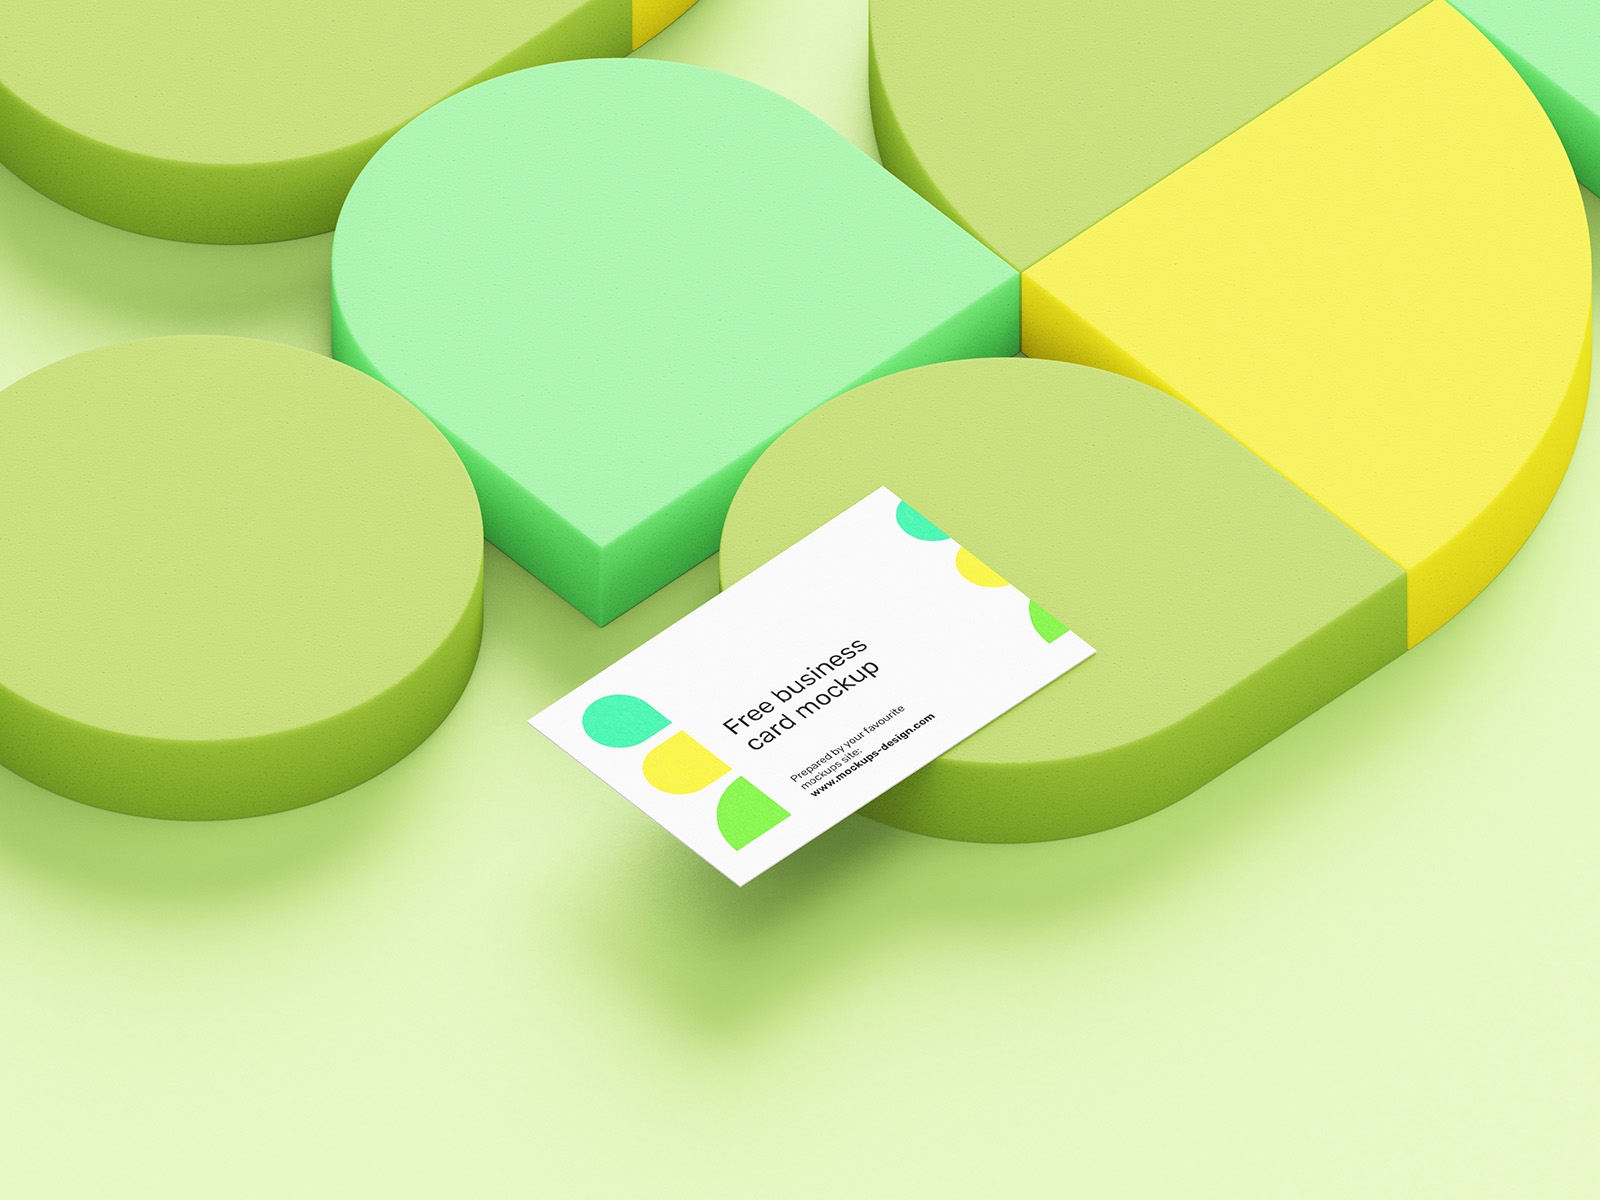 Top and Perspective View of 5 Business Card Mockups on Geometric Background FREE PSD